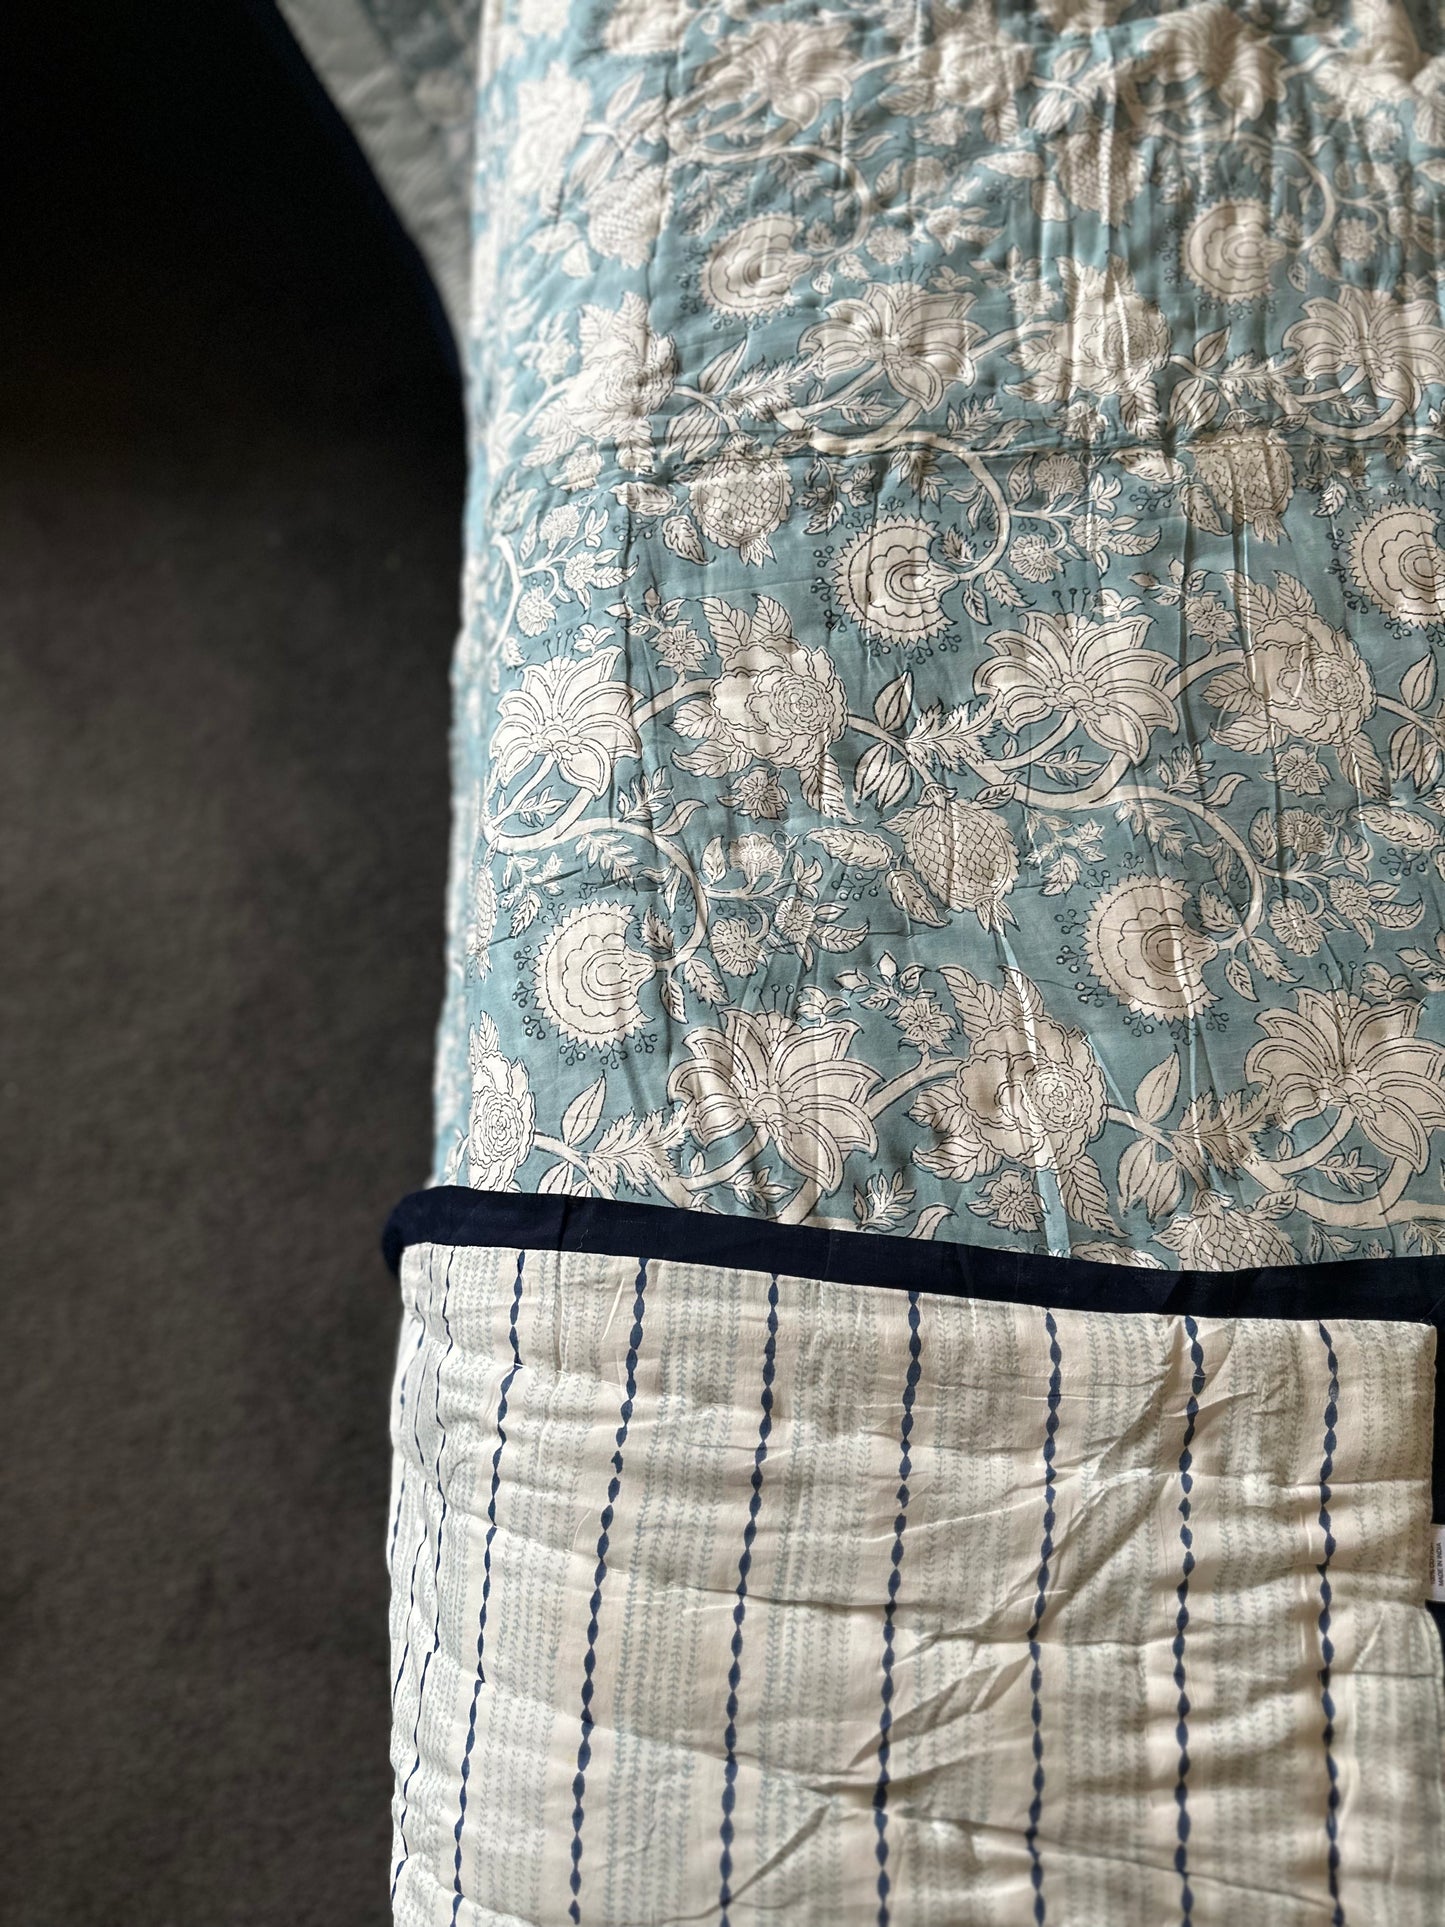 Block Printed Quilts - Queen Sized